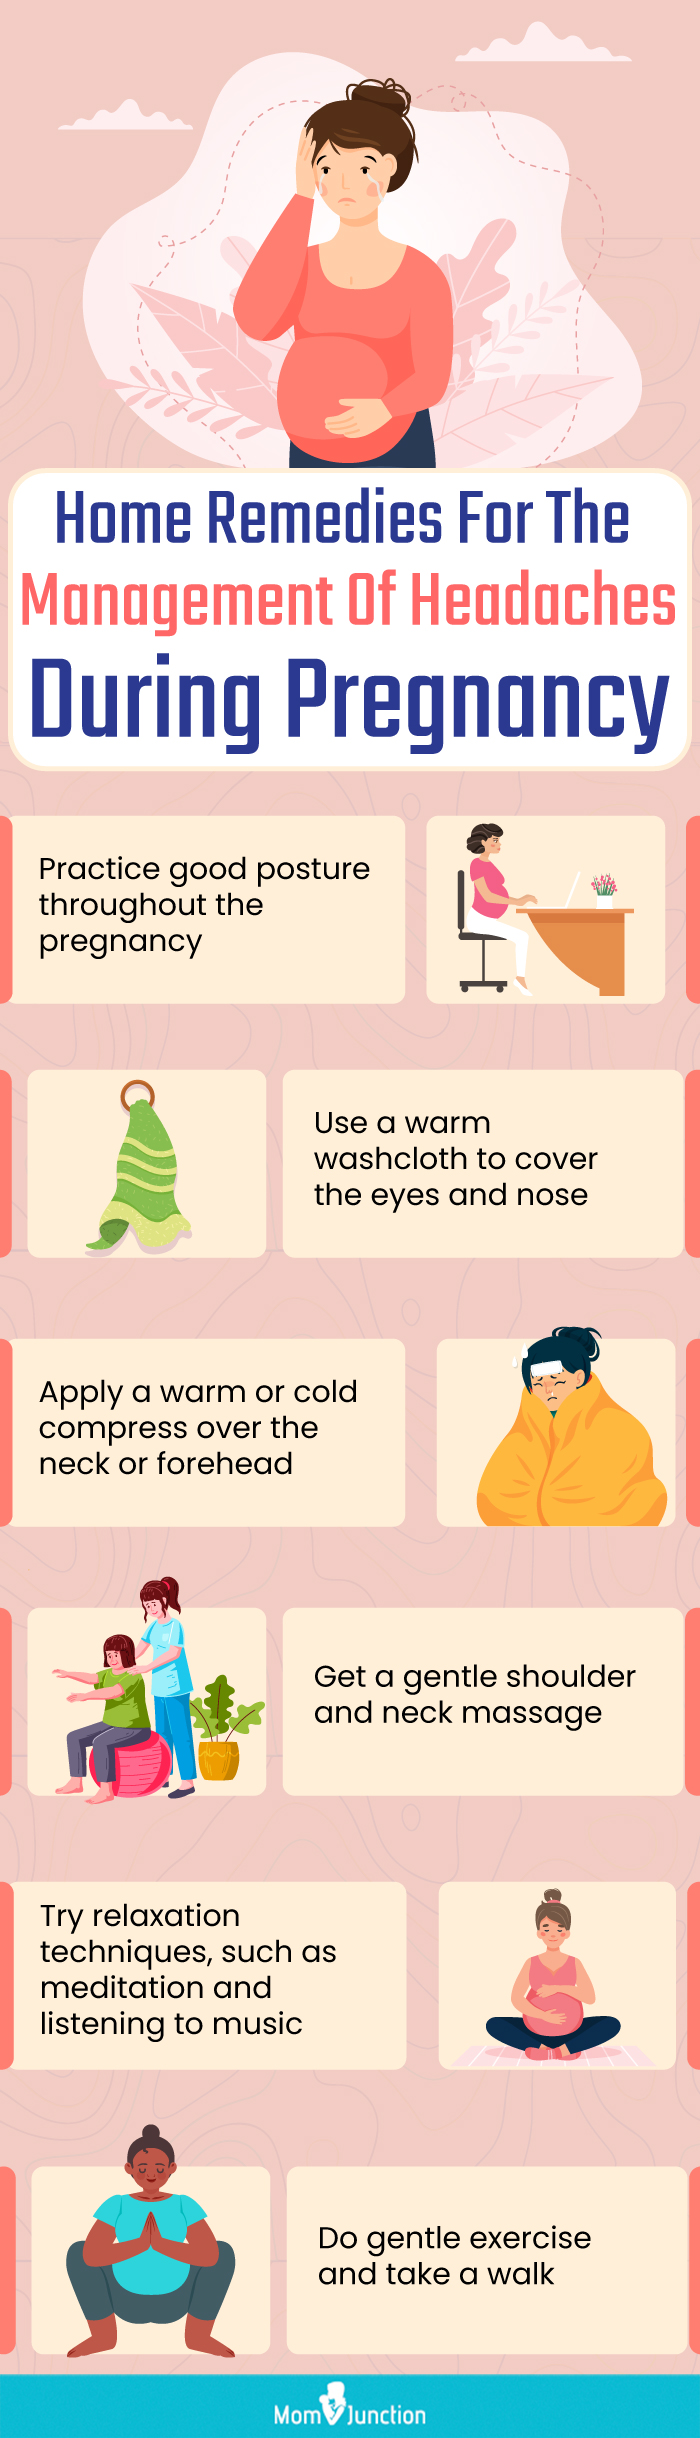 home remedies for the management of headaches during pregnancy (infographic)